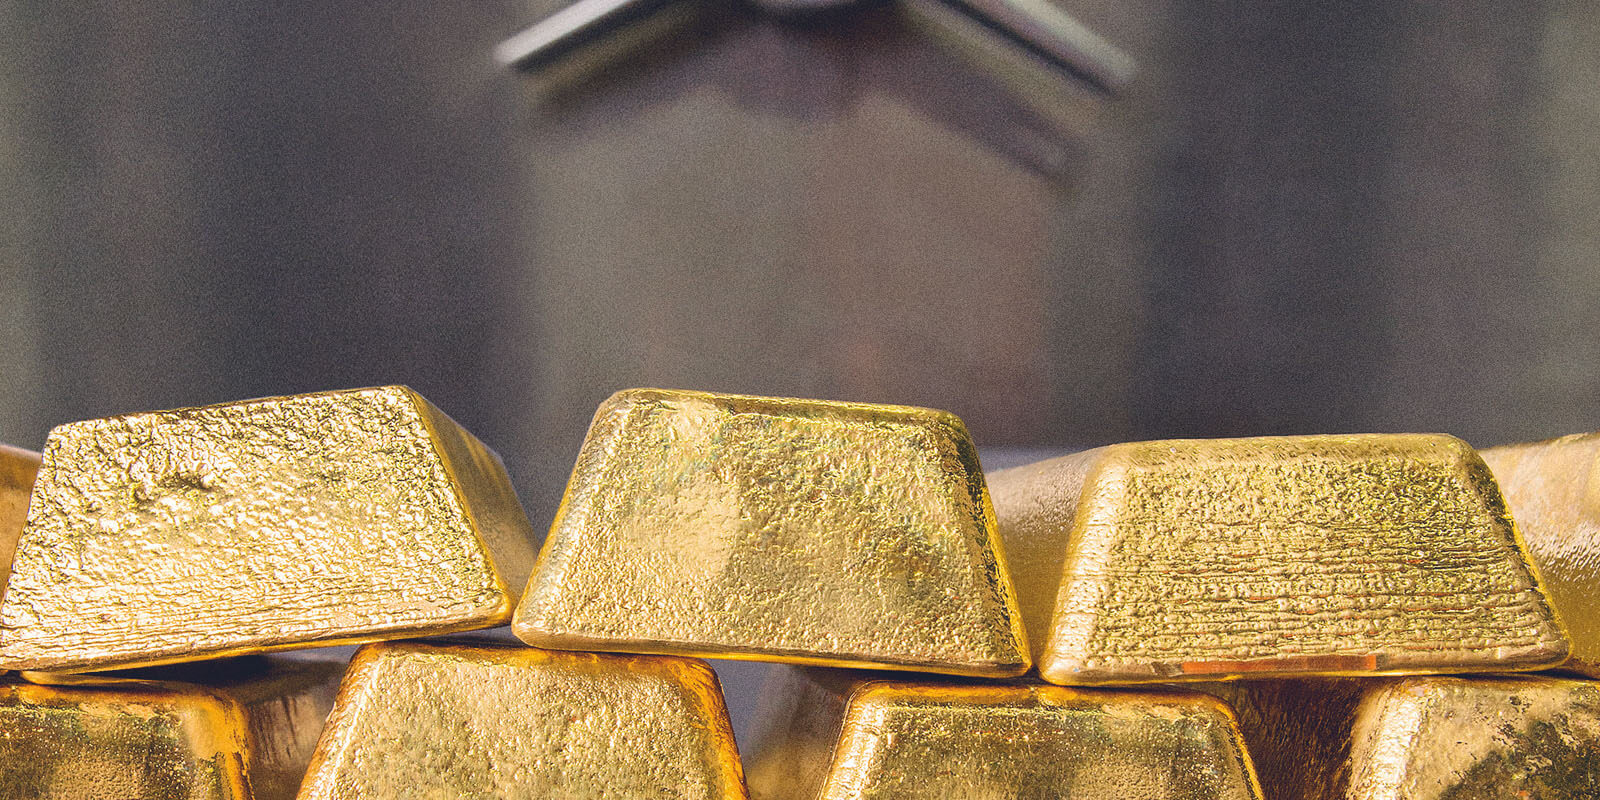 6. How to Store and Take Care of Your Bullion 